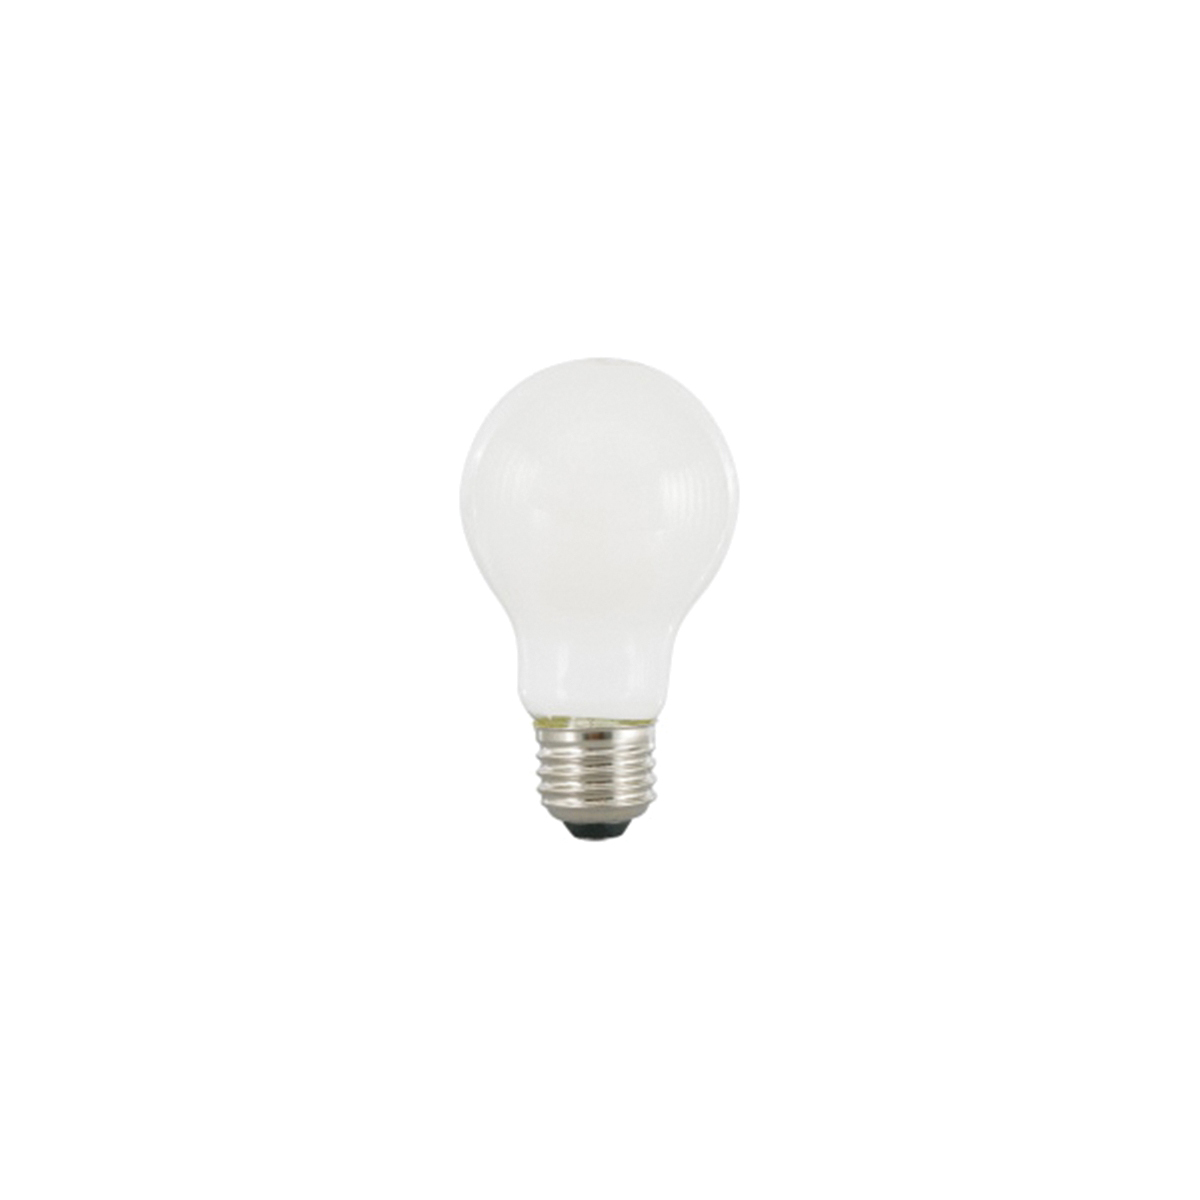 TruWave Series 40748 LED Bulb A19 Lamp, A19 Lamp, E26 Medium Lamp Base, Dimmable, Frosted, 2700 K Color Temp